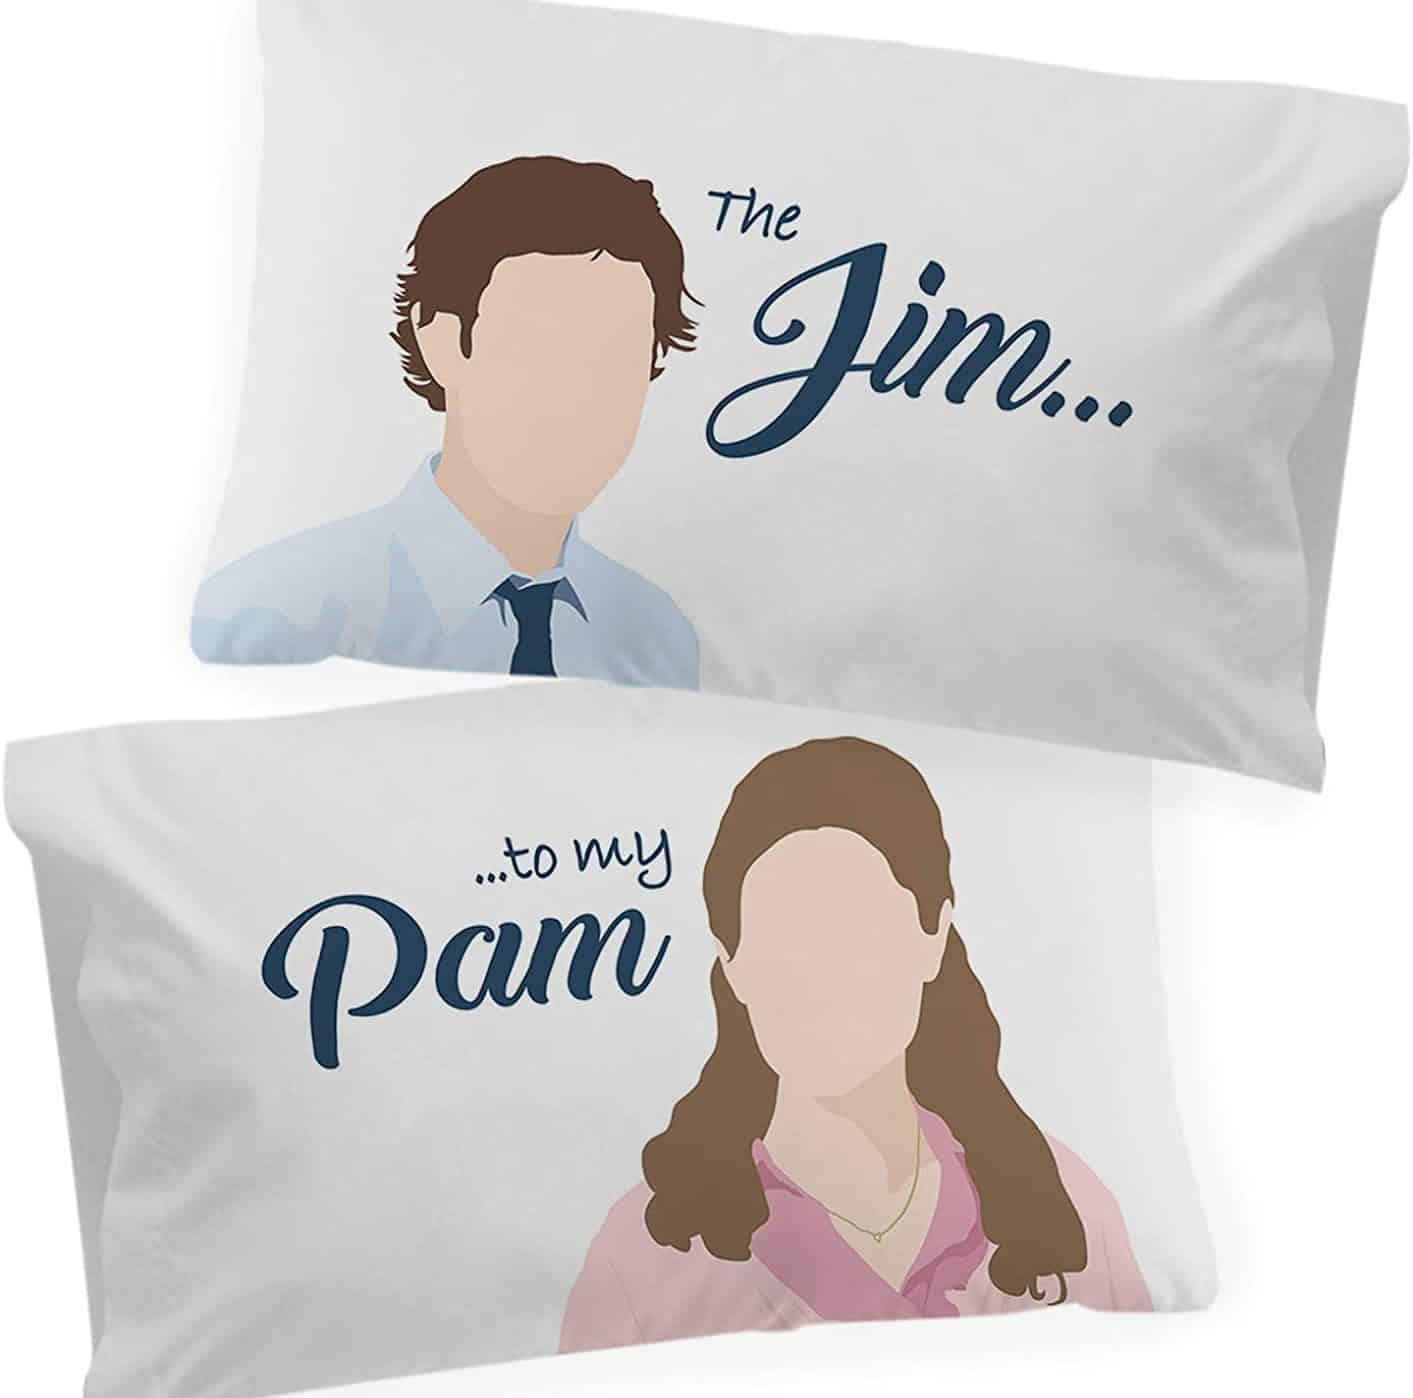 his-and-hers-gifts-pillowcases